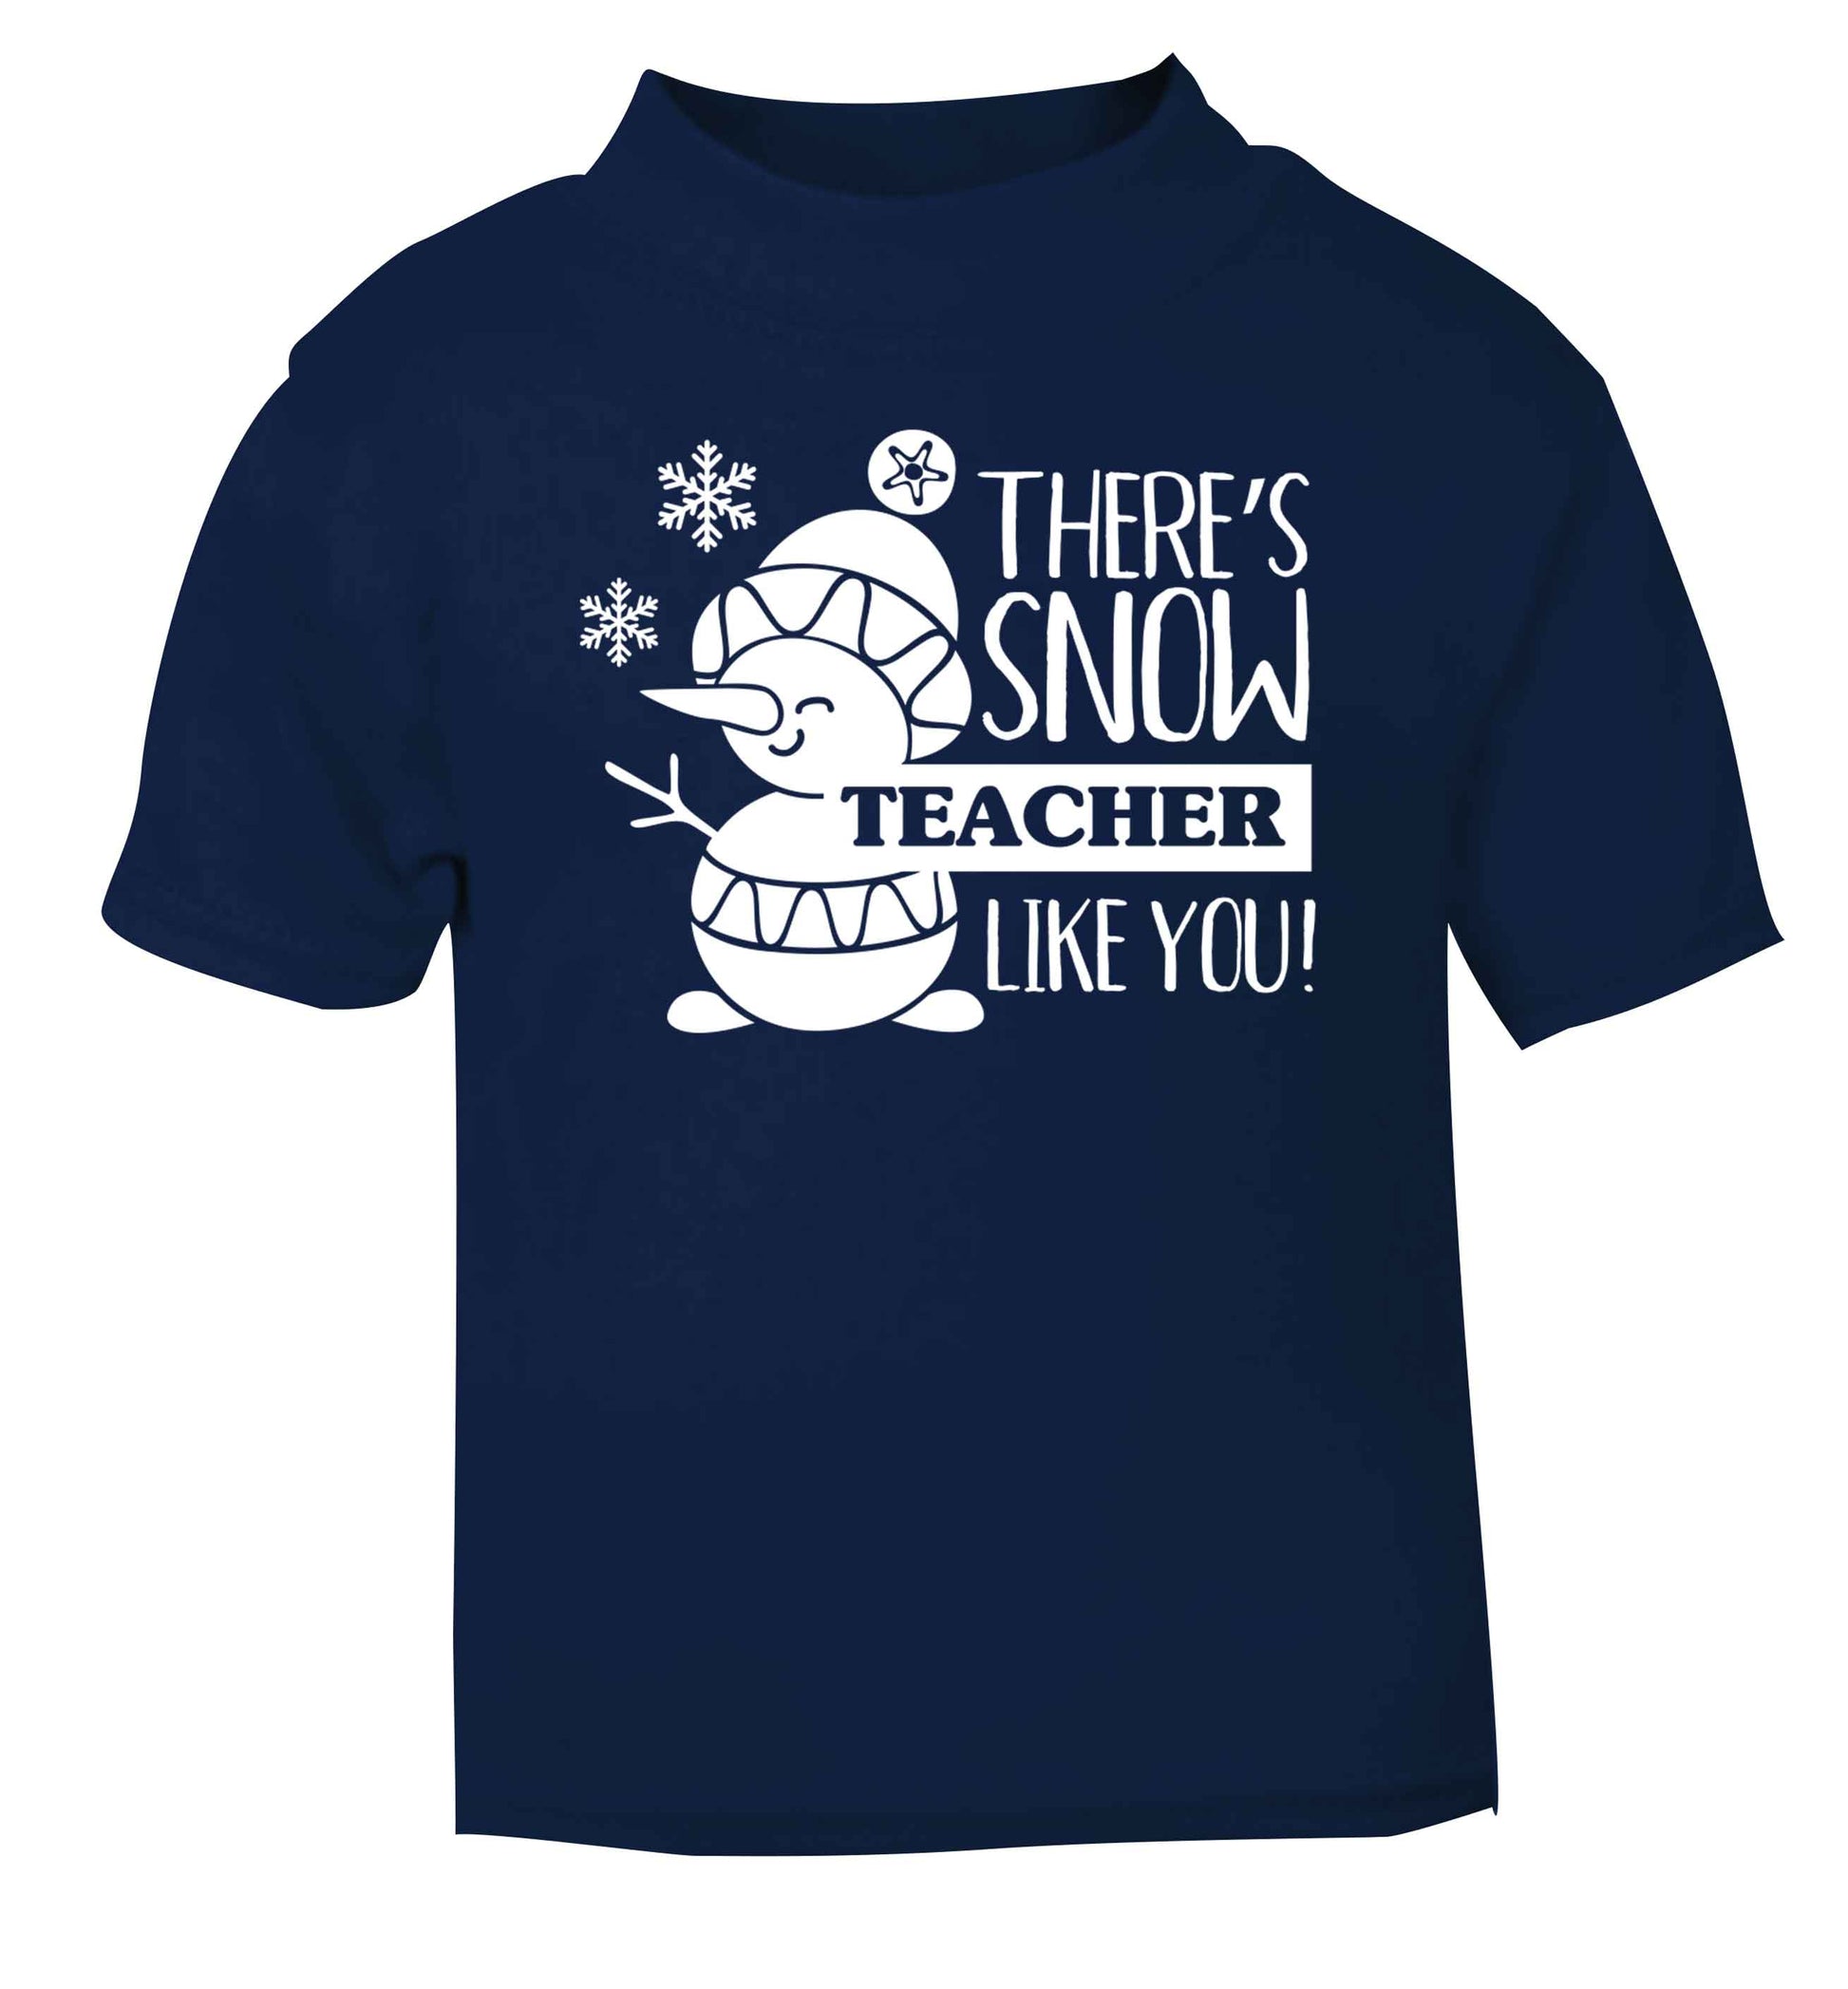 There's snow teacher like you navy baby toddler Tshirt 2 Years